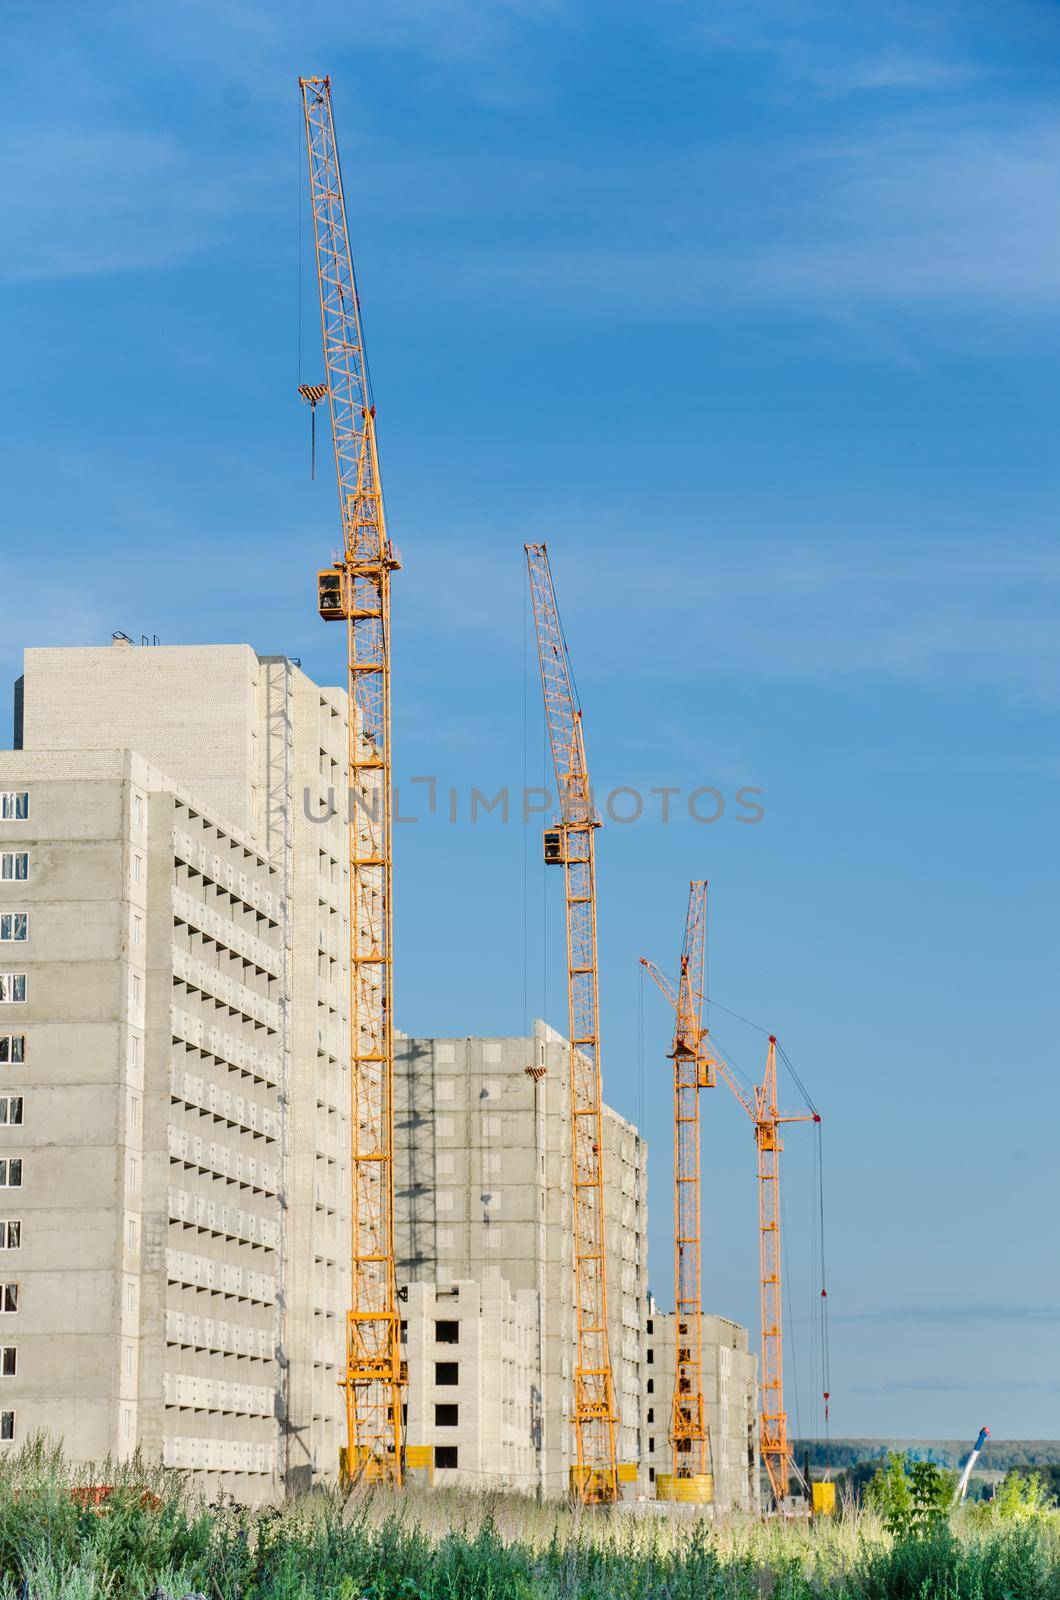 Construction site with cranes.